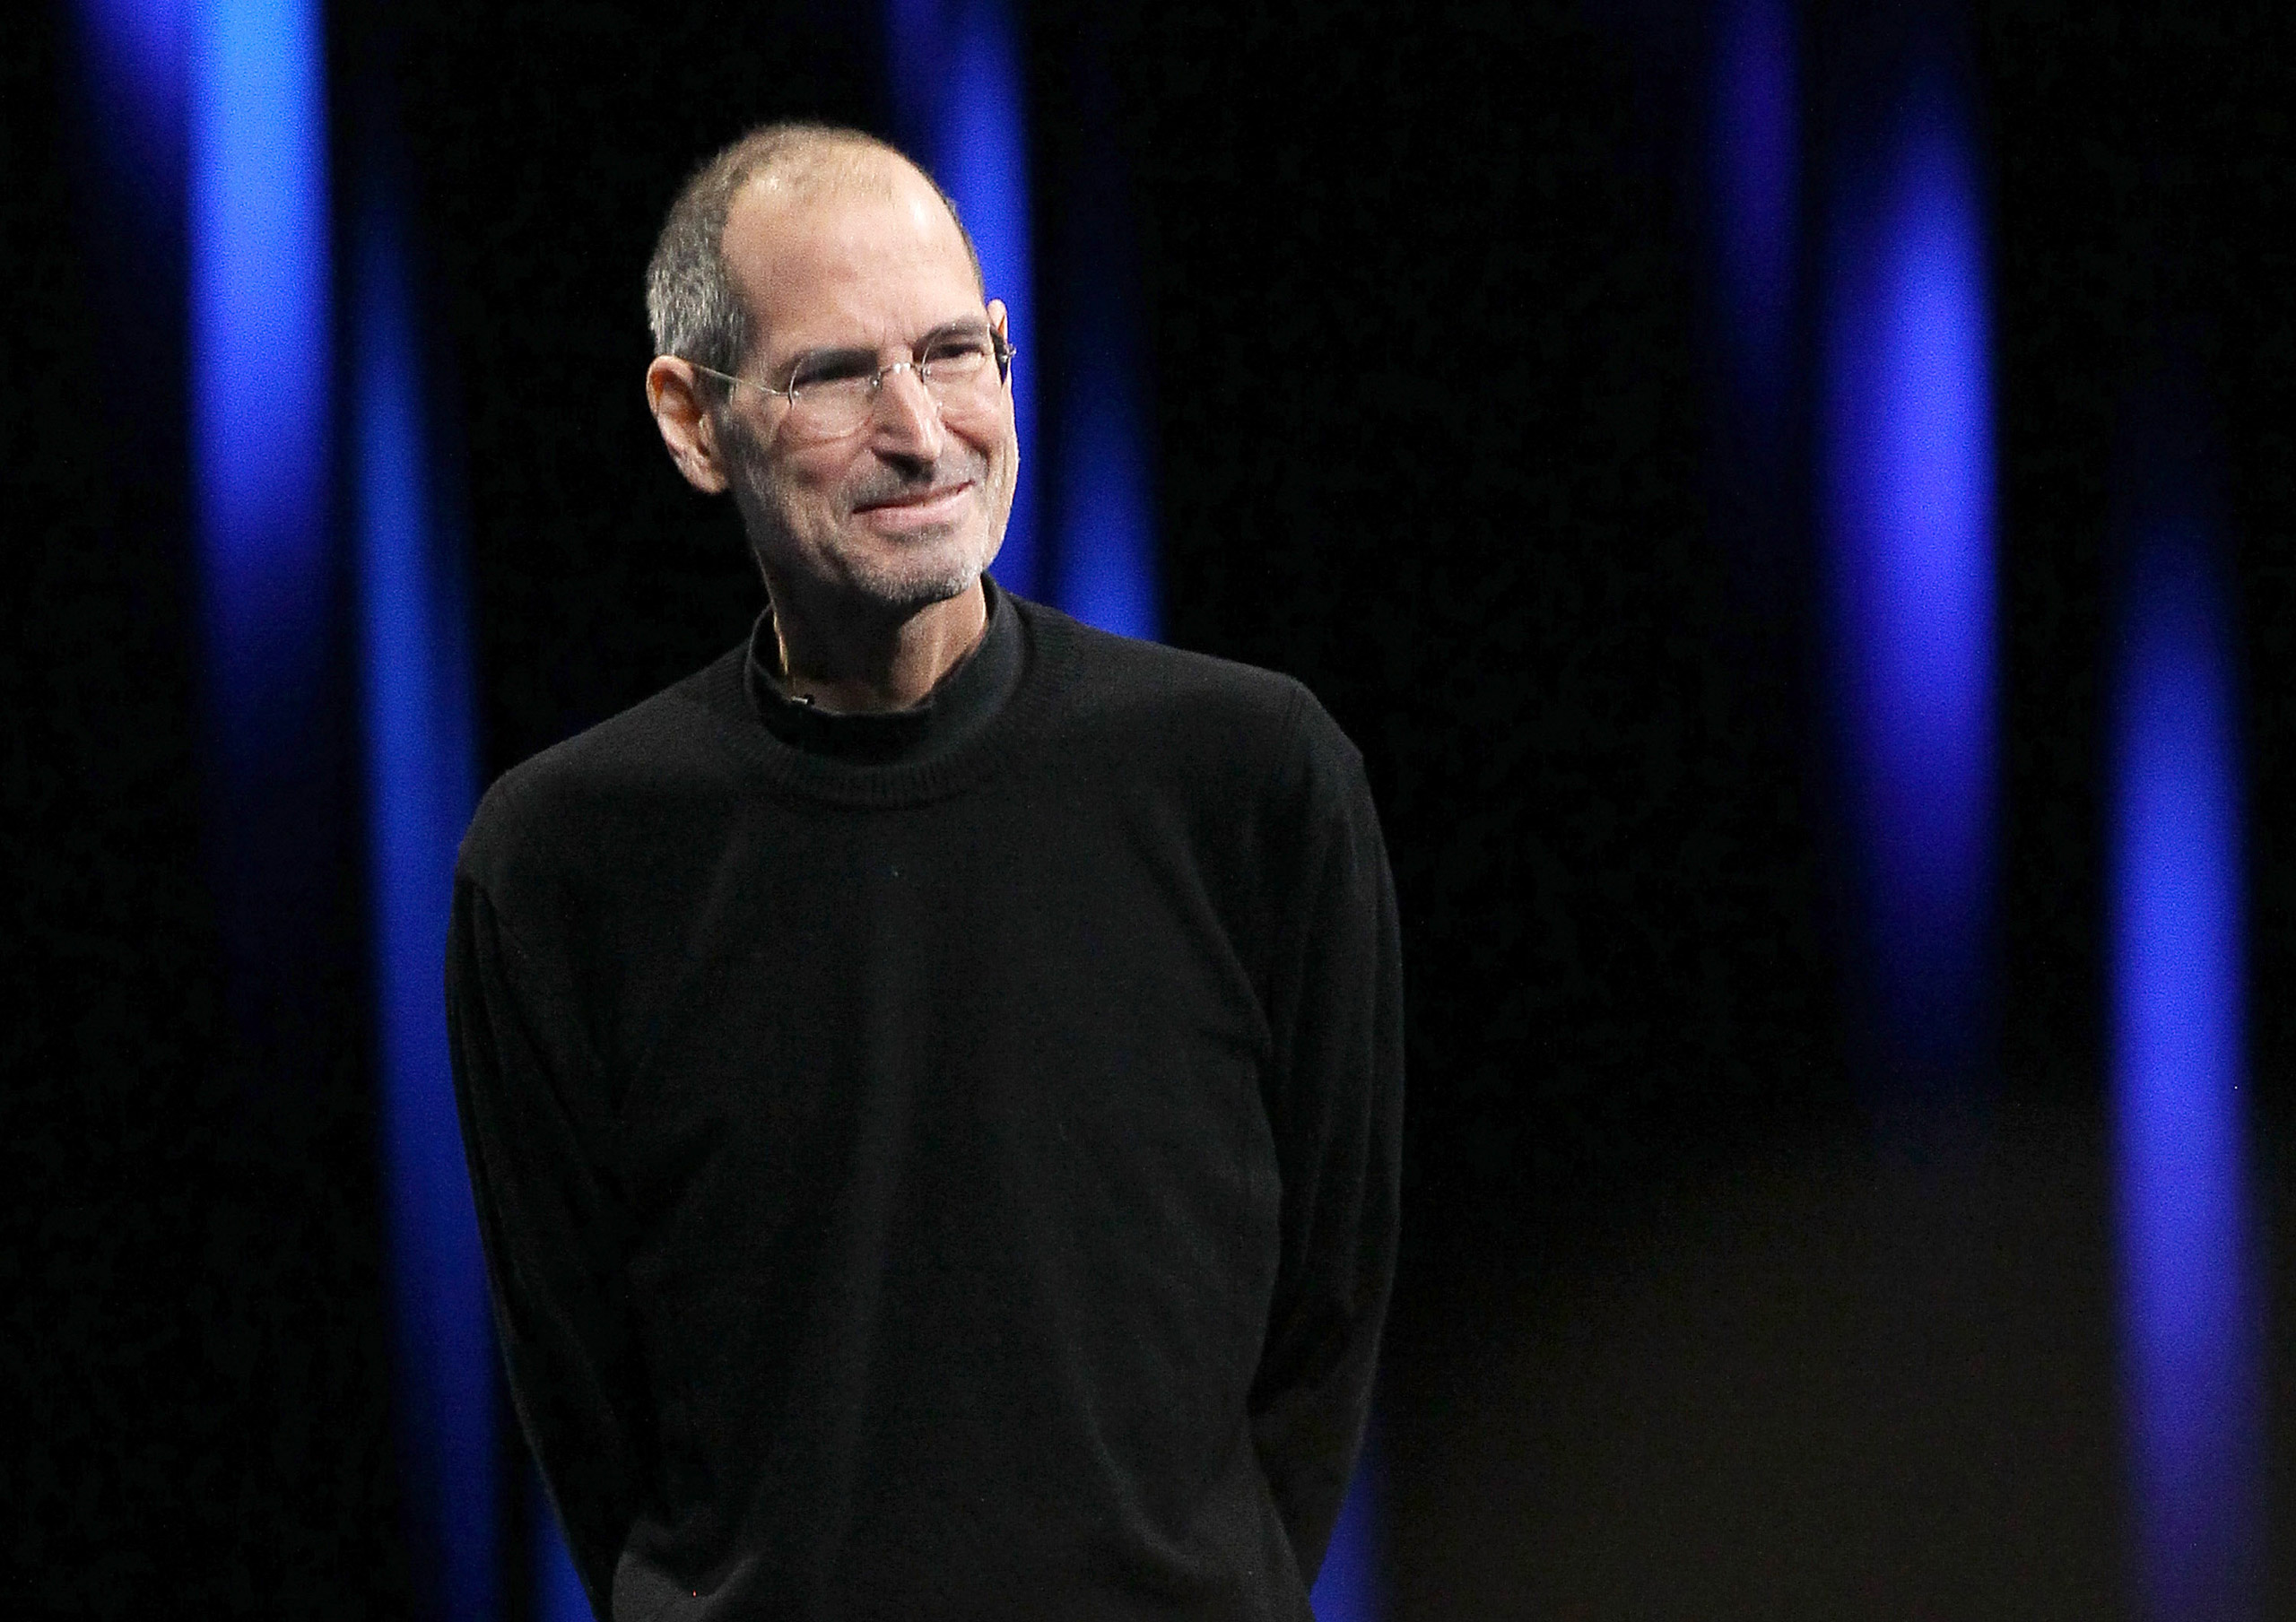 Apple CEO Steve Jobs at the 2011 Apple World Wide Developers Conference at the Moscone Center on June 6, 2011 in San Francisco.